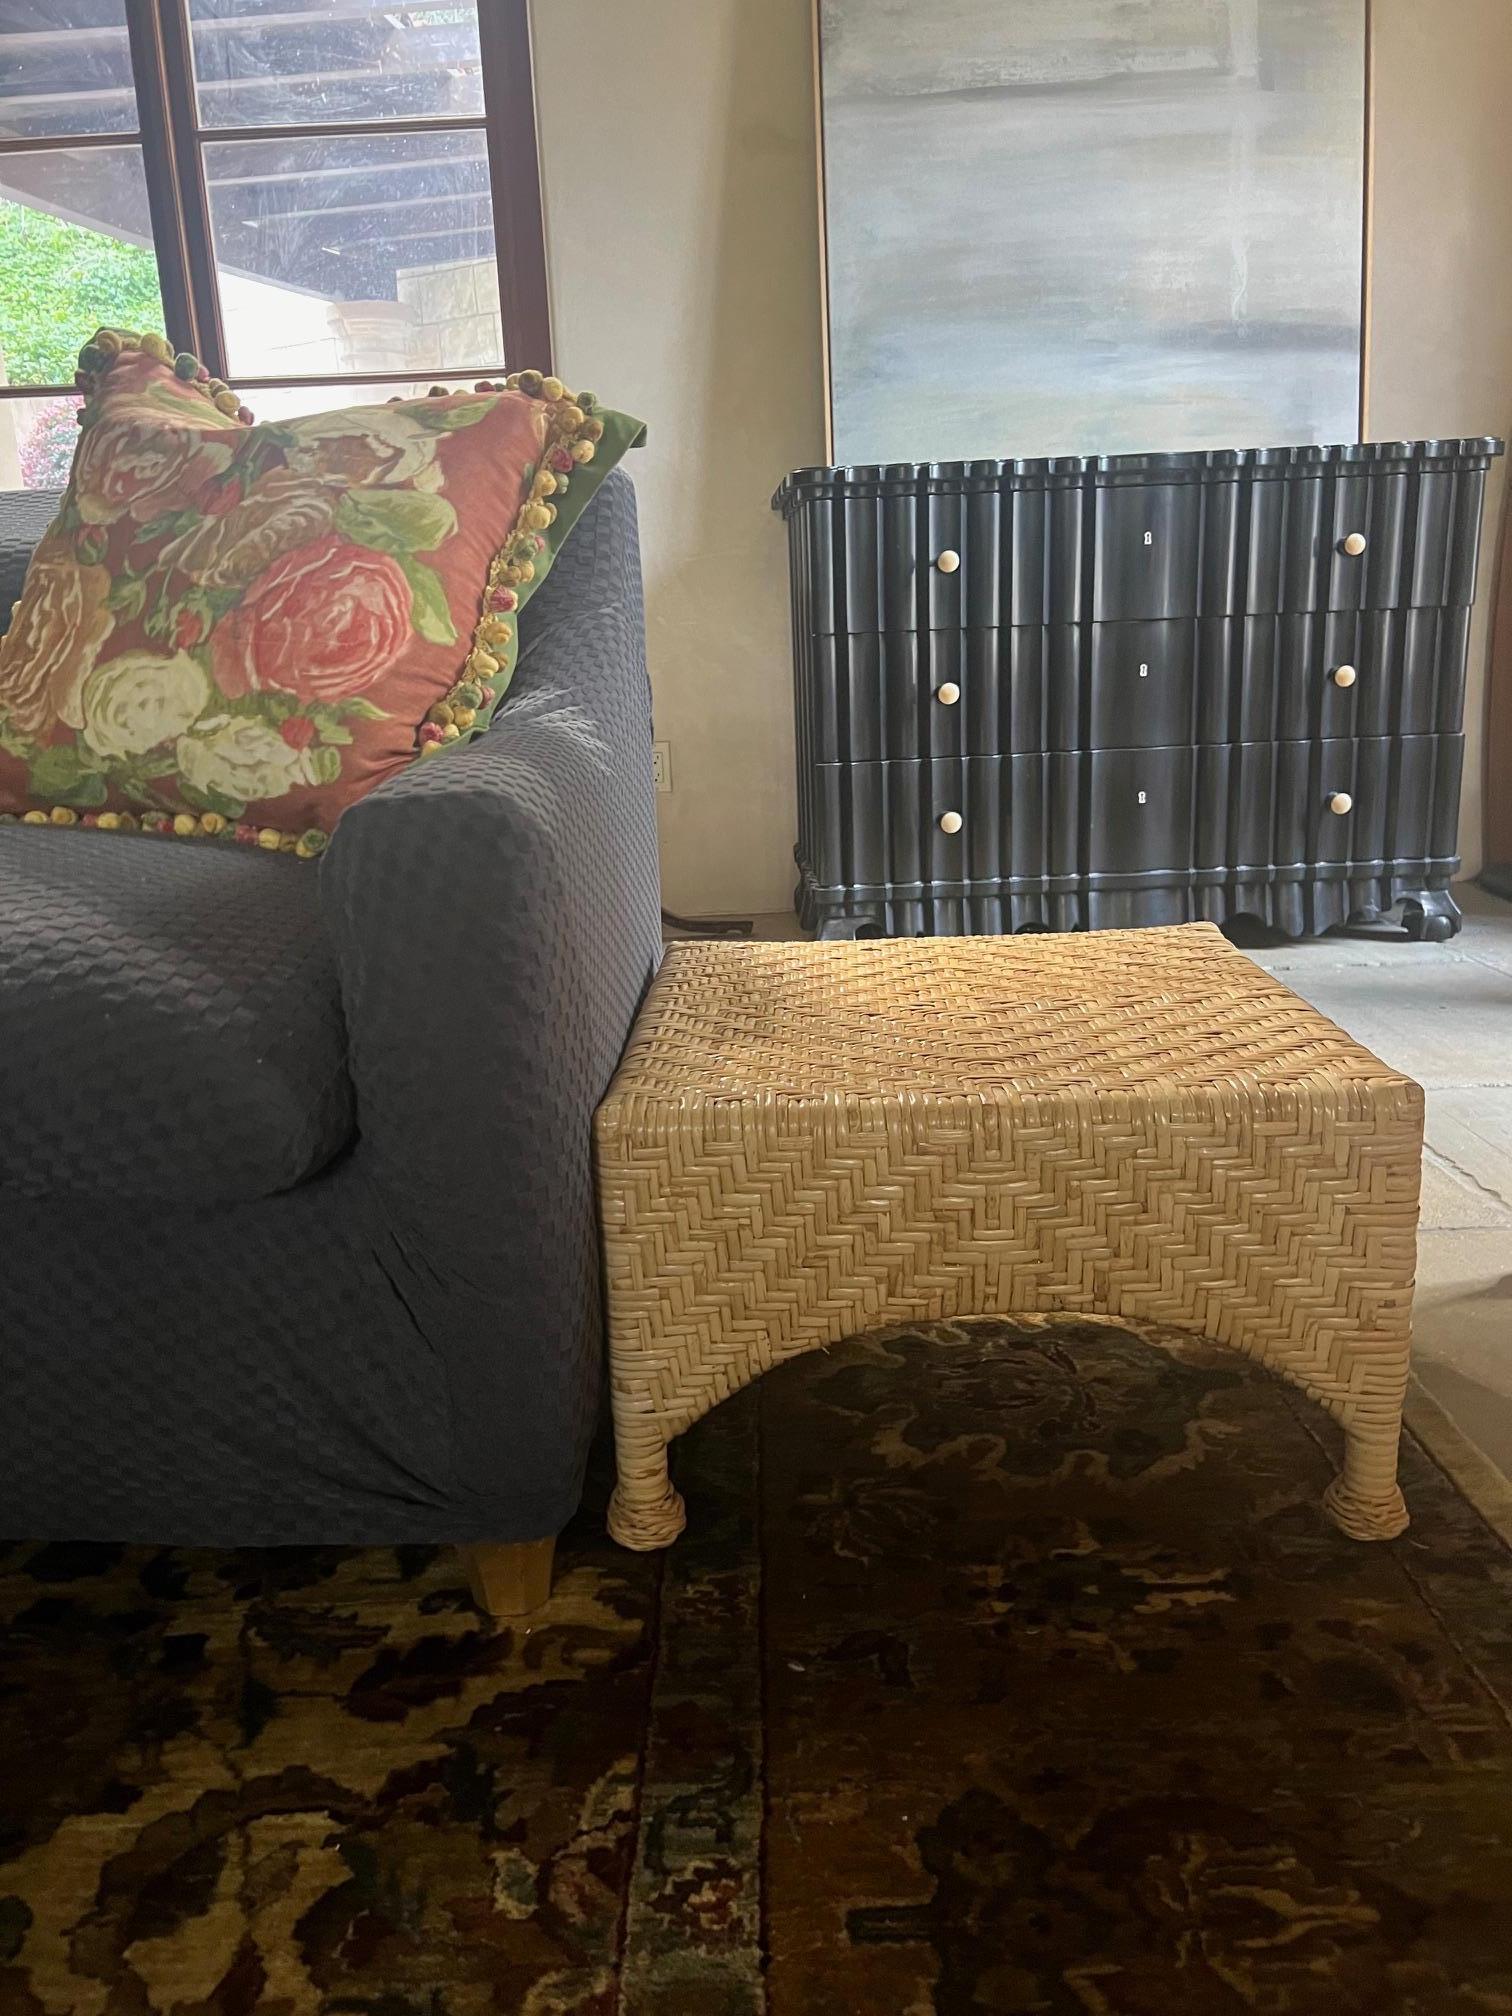 Wicker ottoman or low side table by McGuire Furniture. The wicker is woven around steel making it a sturdy piece, the feet are ball design.

Furniture can always be picked up for free from me in the San Francisco Bay Area.